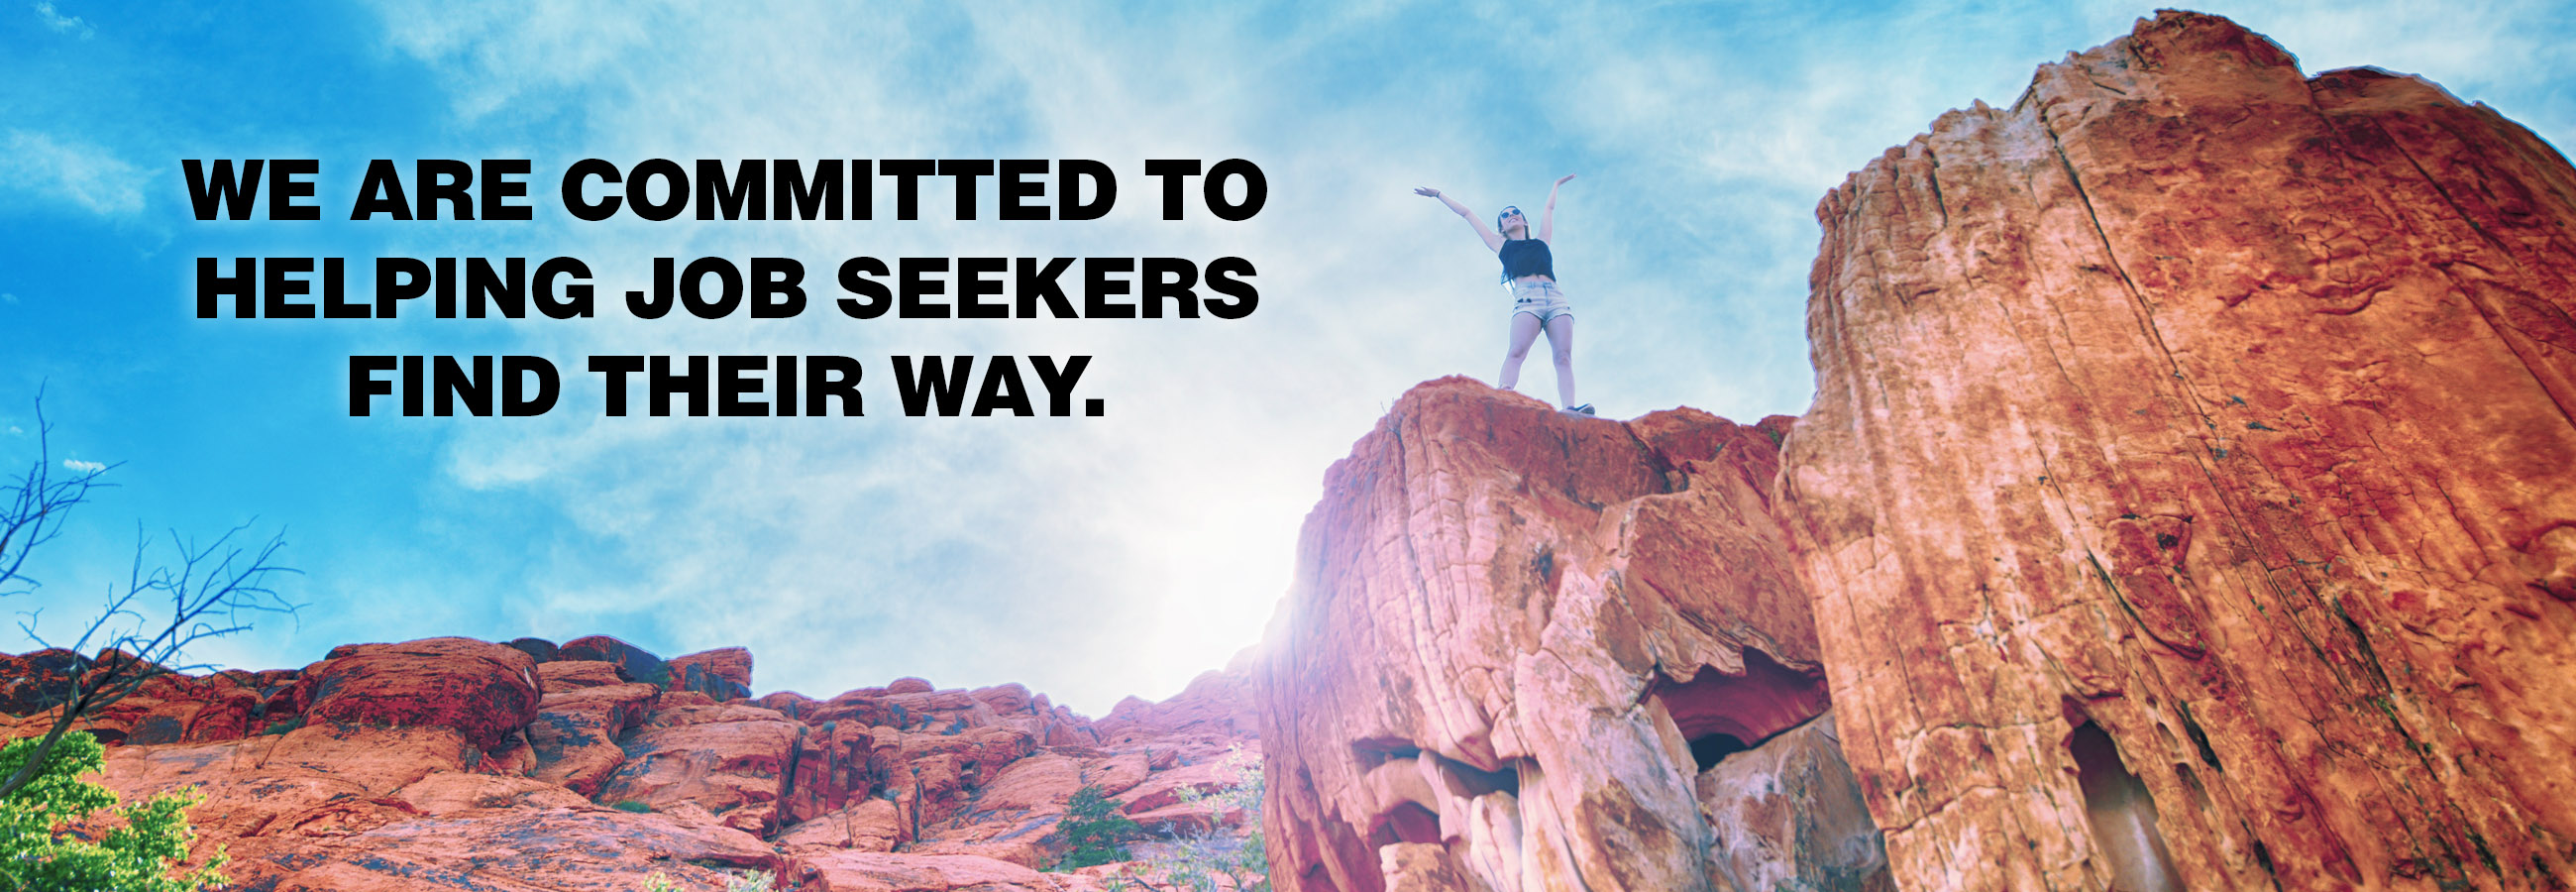 We are committed to helping job seekers find their way.